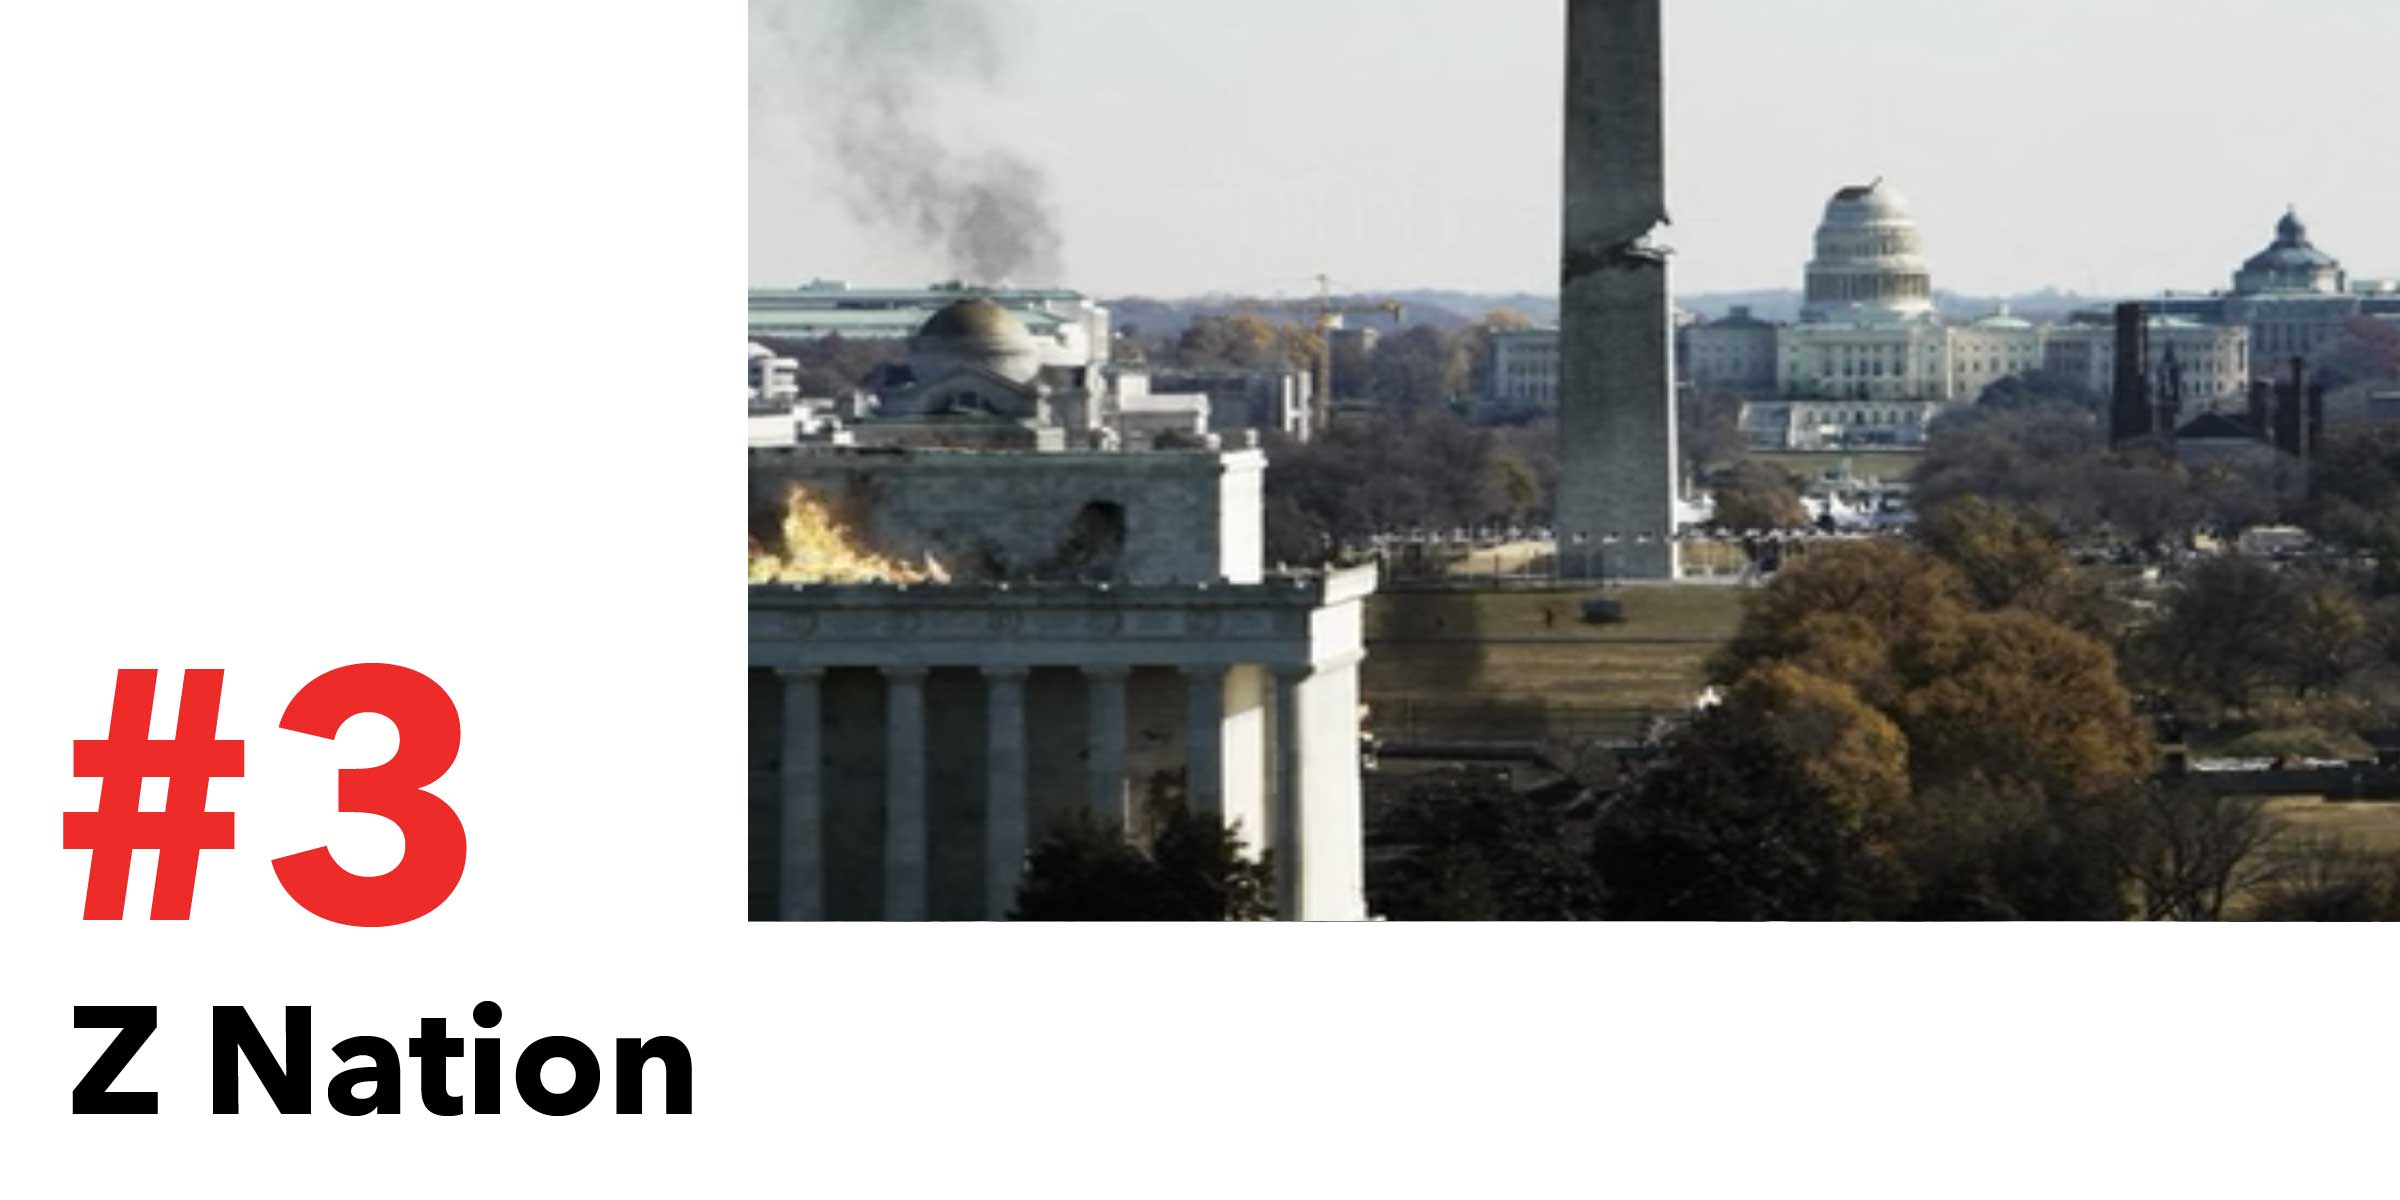 Washington DC is clearly in ruins in Z nation.